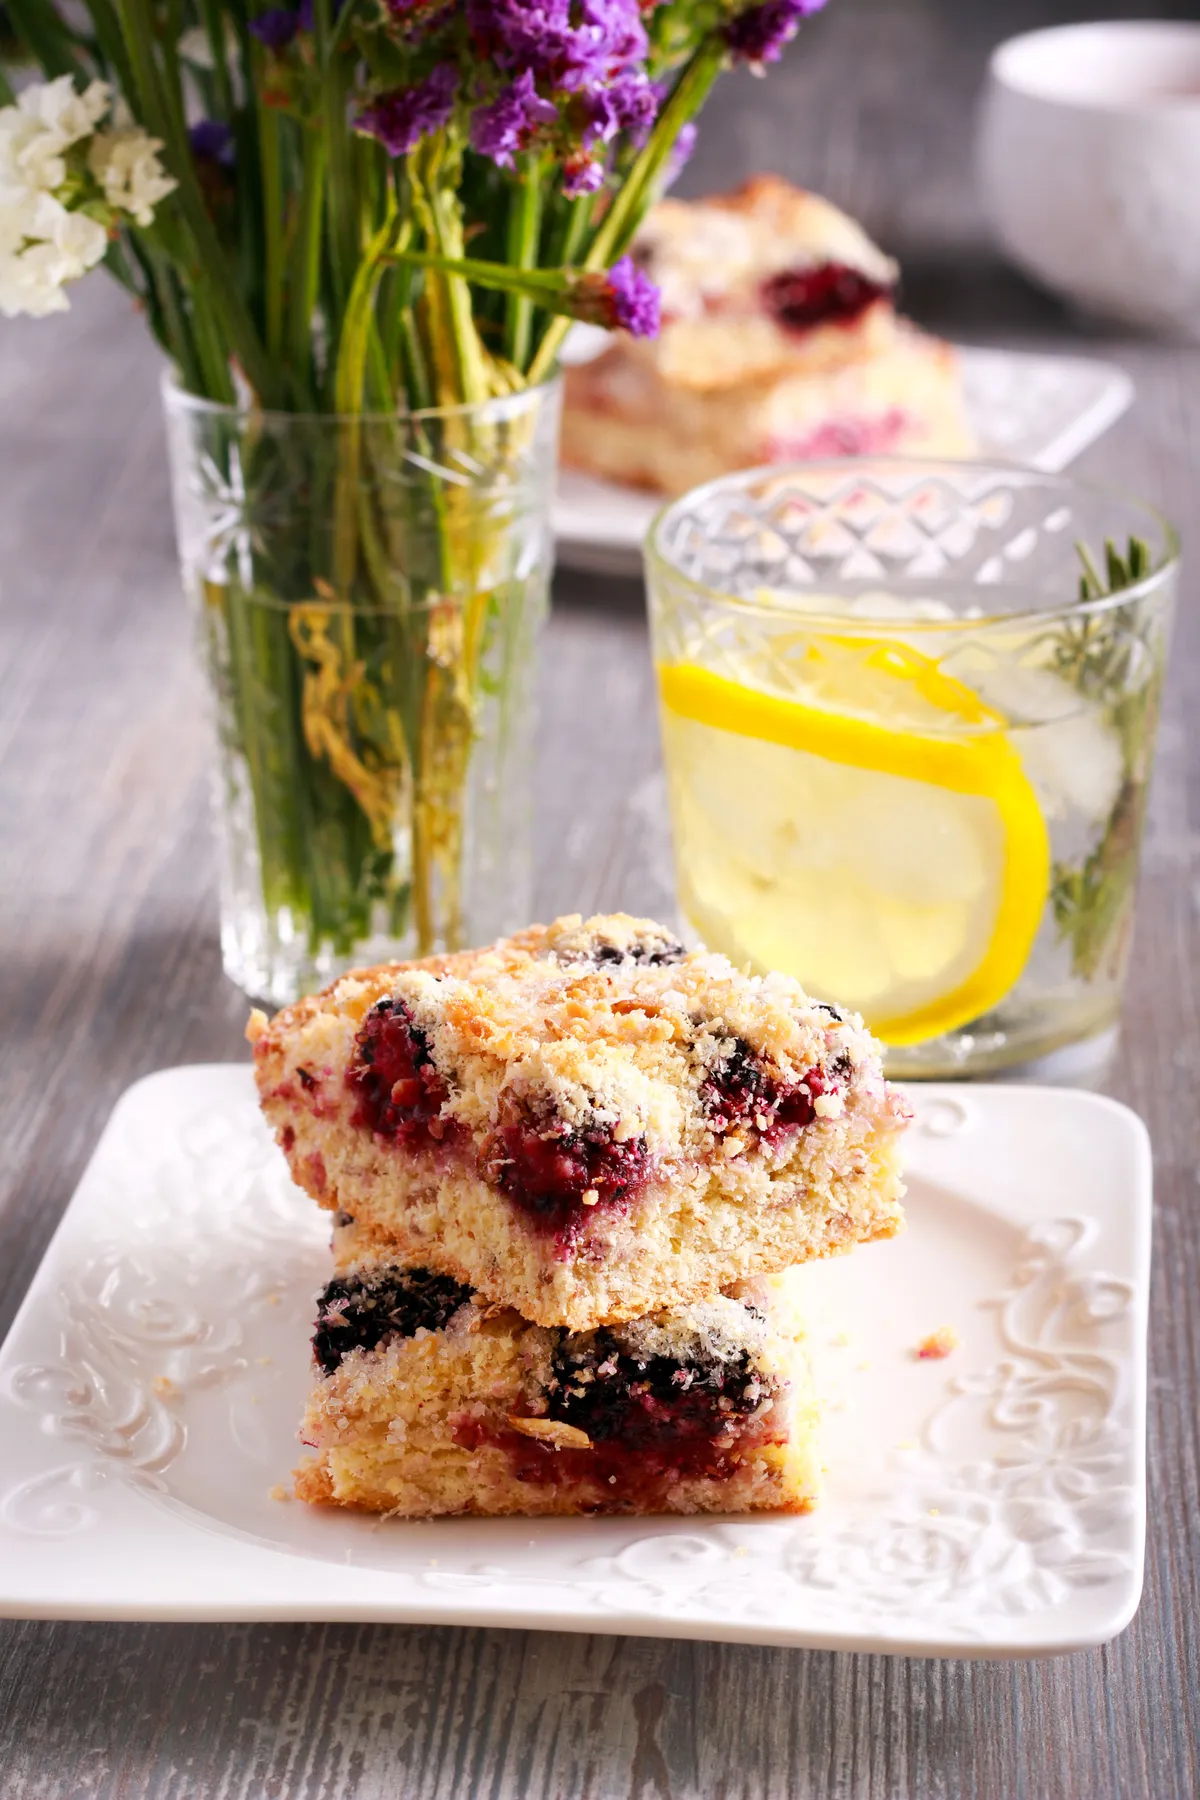 Apple and blackberry crumble squares (Photo by: manyakotic via Getty Images)